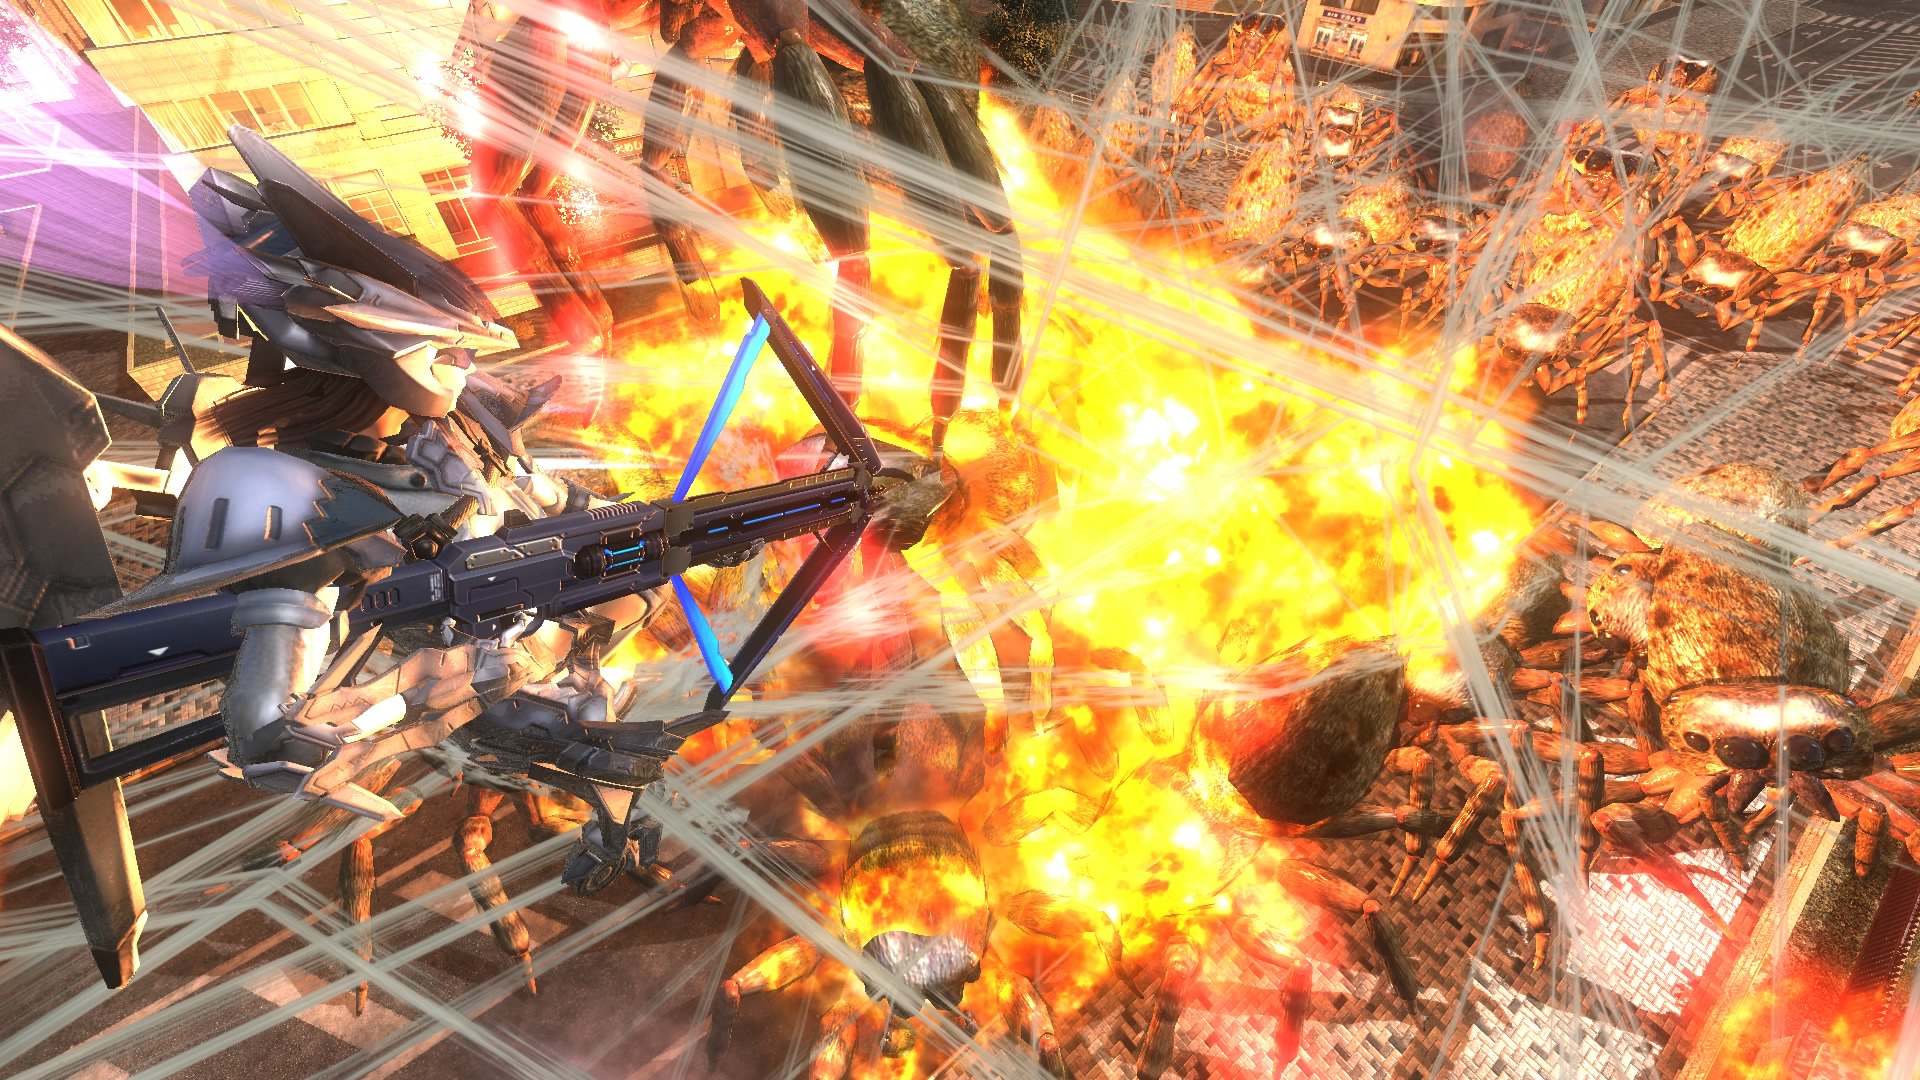 Download Earth Defense Force 4 1 The Shadow Of New Despair Full Pc Game